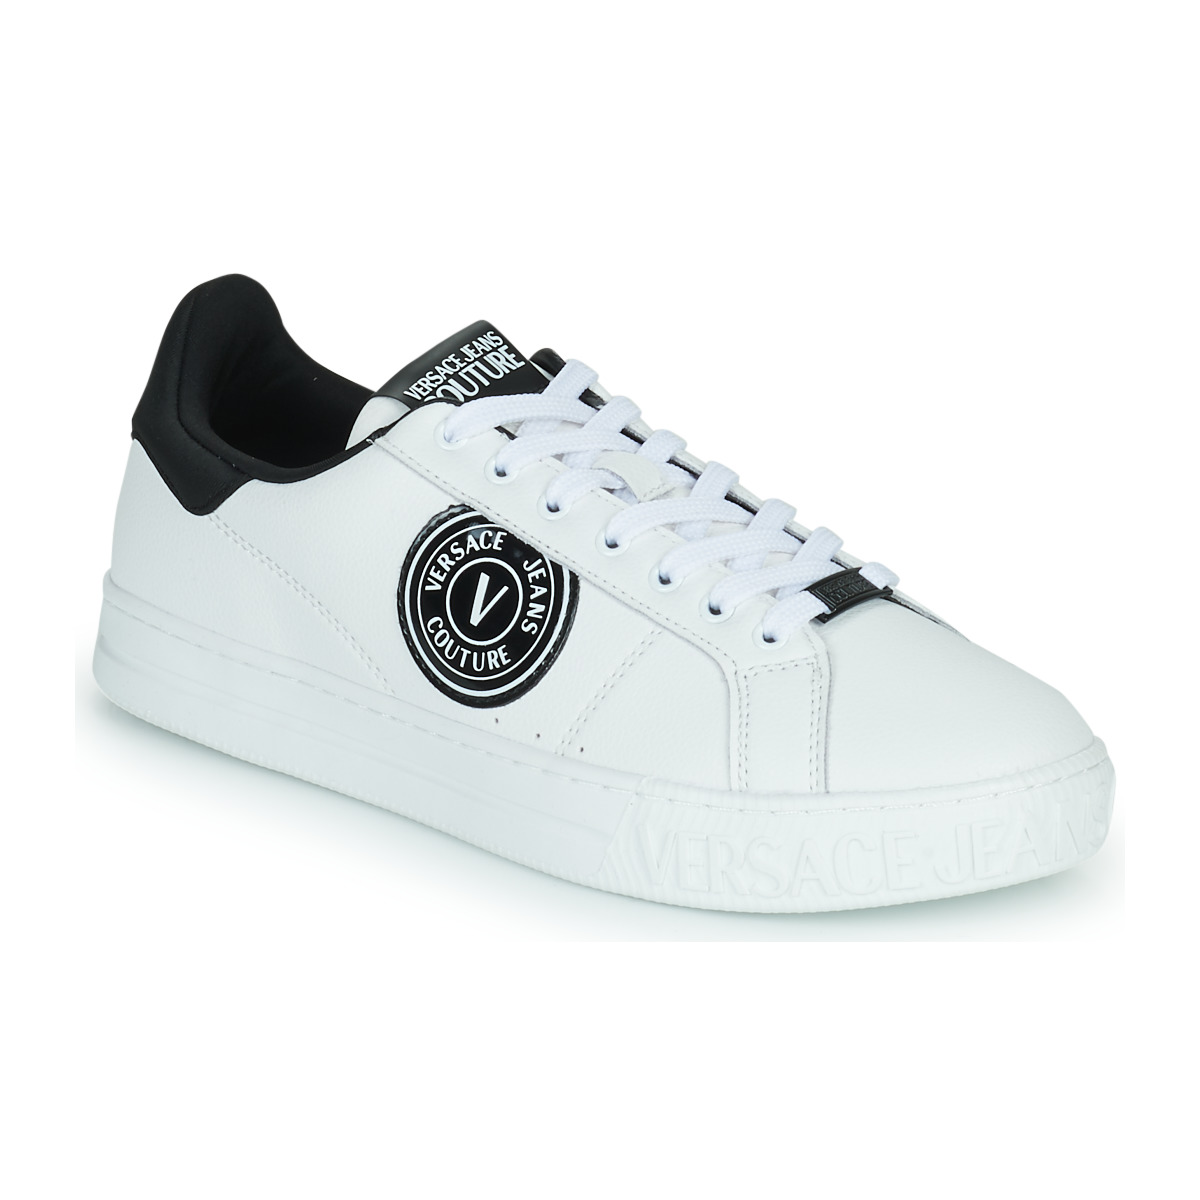 Aggregate more than 217 versace jeans white sneakers super hot